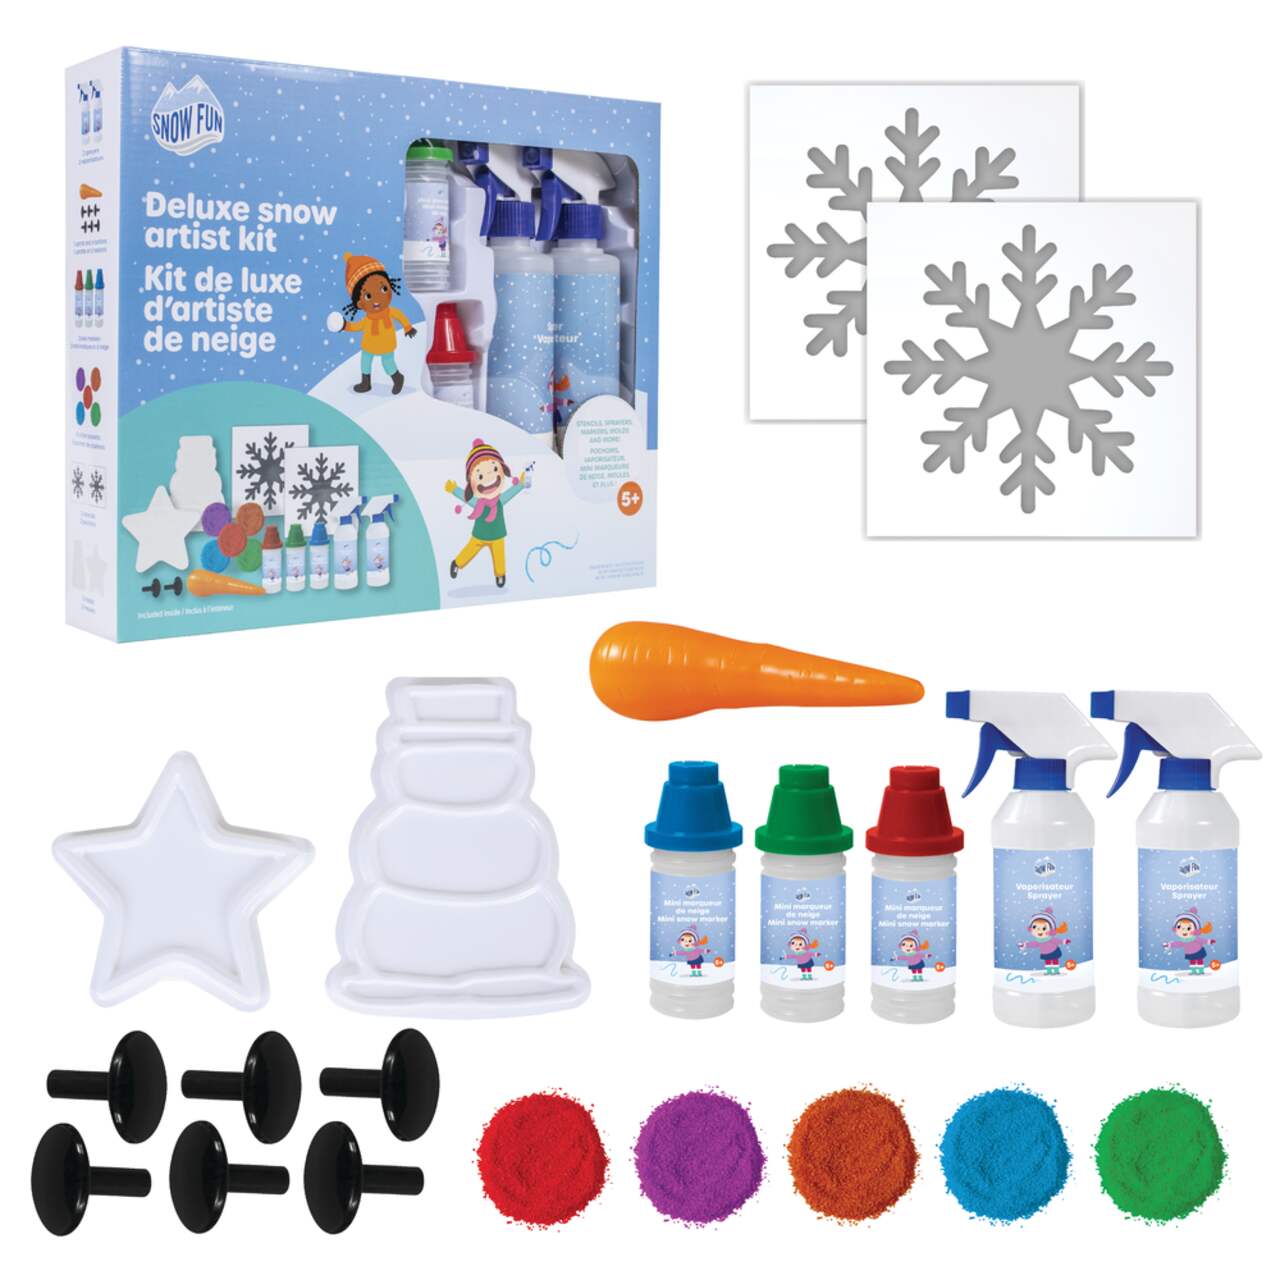 https://media-www.canadiantire.ca/product/playing/seasonal-recreation/winter-recreation/0821043/ultimate-sno-kit-e3e55b46-9d71-4a81-9cae-b3def21a3814.png?imdensity=1&imwidth=1244&impolicy=mZoom